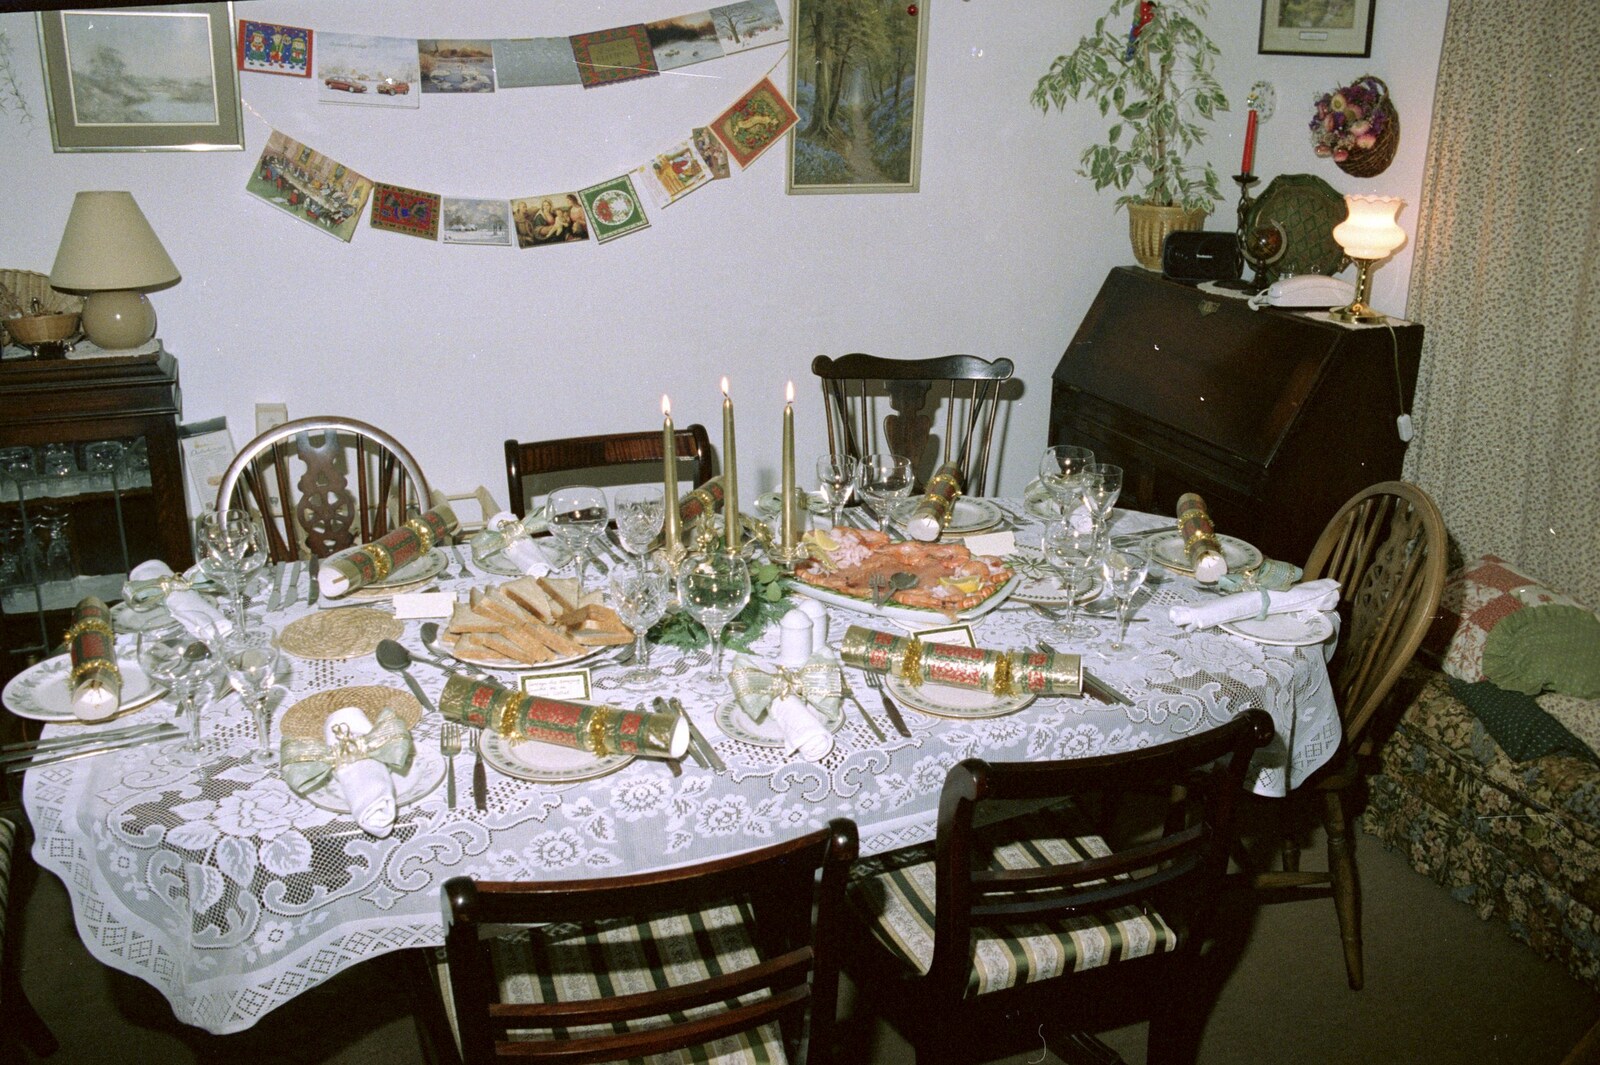 The Christmas table from Christmas Down South, Burton and Walkford, Dorset - 25th December 1994